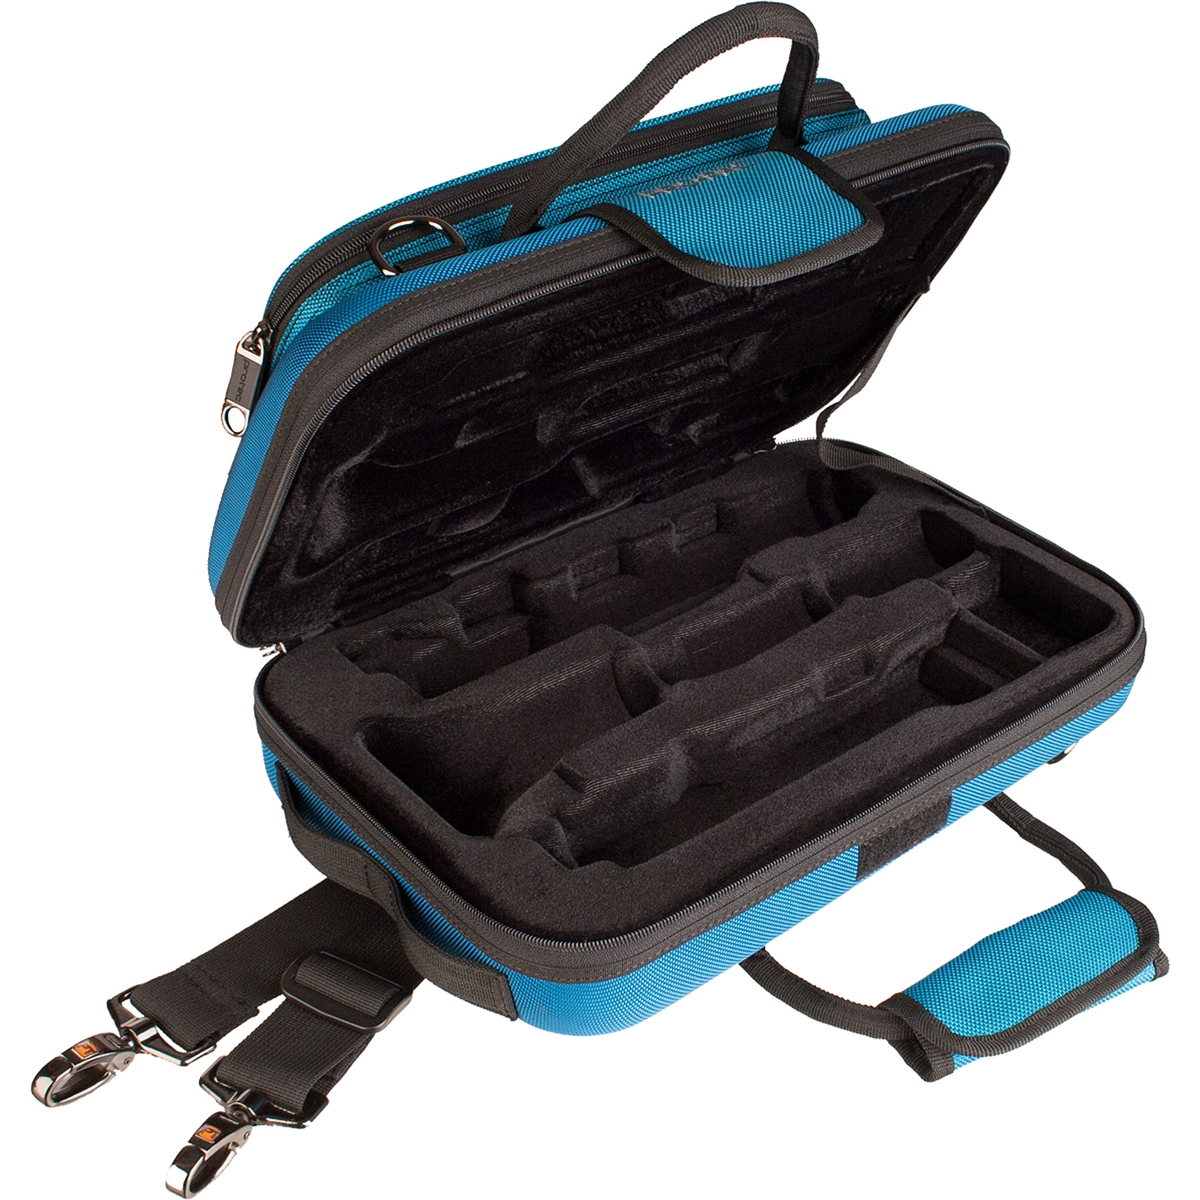 Protec PB307-TB Case for Clarinet - Teal Blue